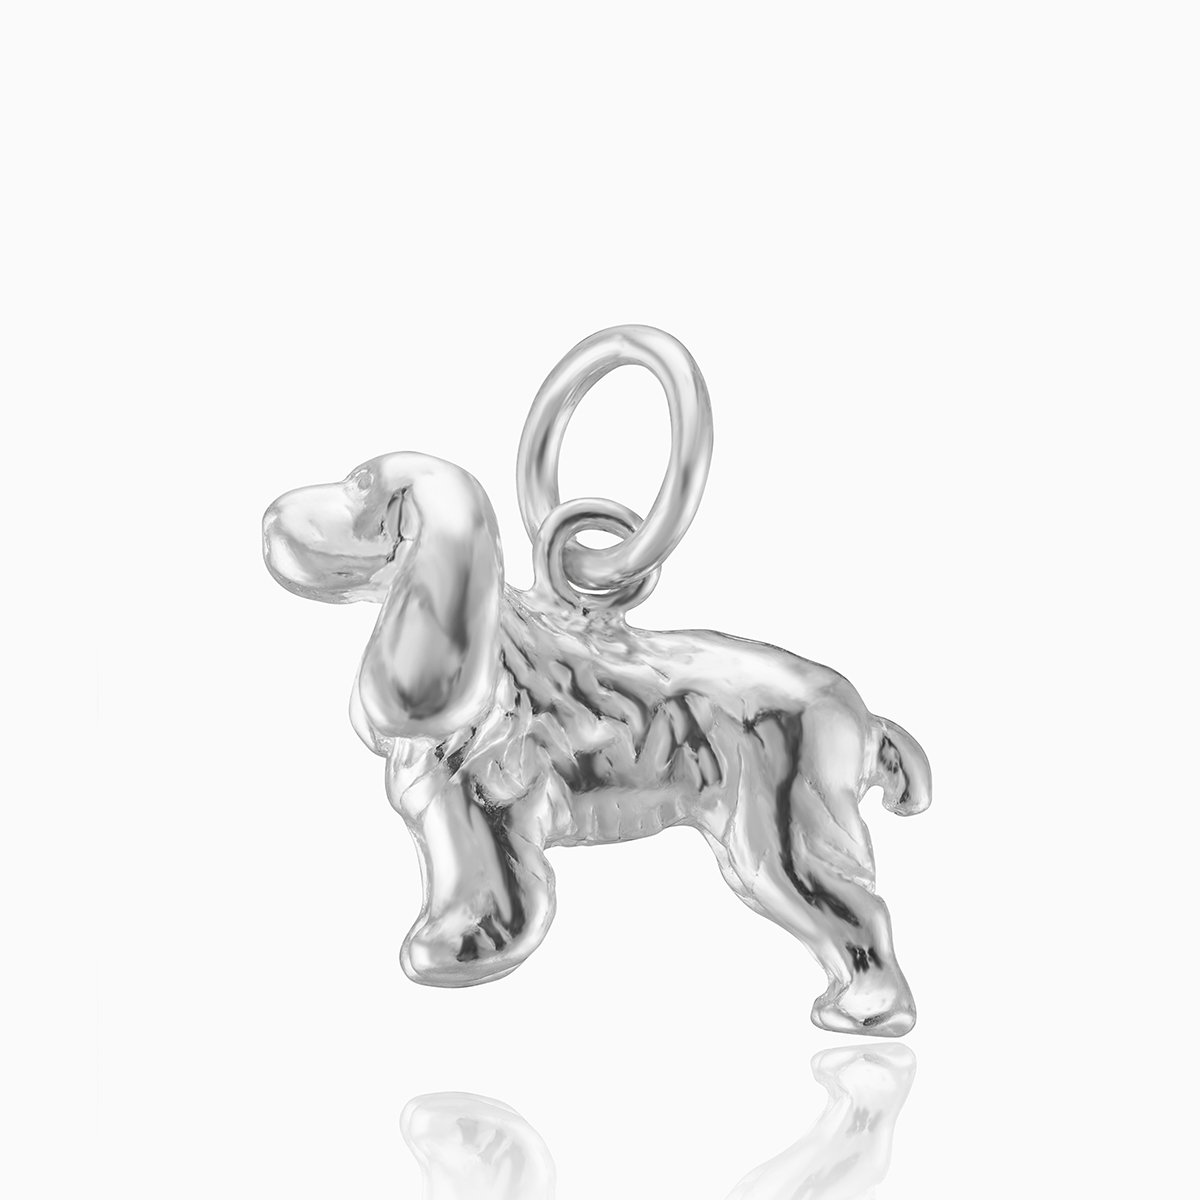 Product title: Silver Dog Charm, product type: Charm